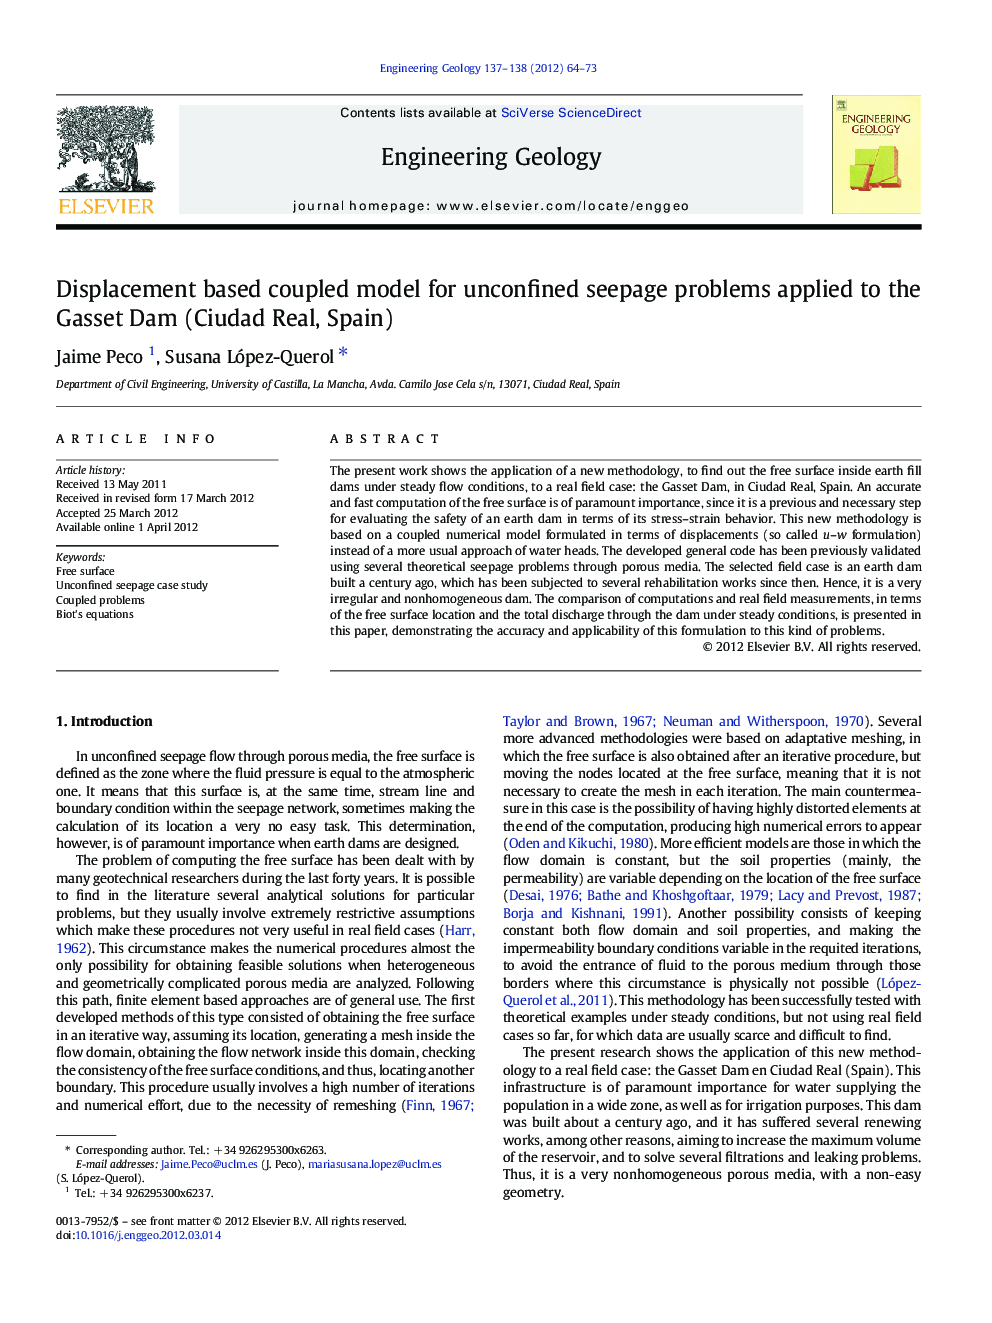 Displacement based coupled model for unconfined seepage problems applied to the Gasset Dam (Ciudad Real, Spain)